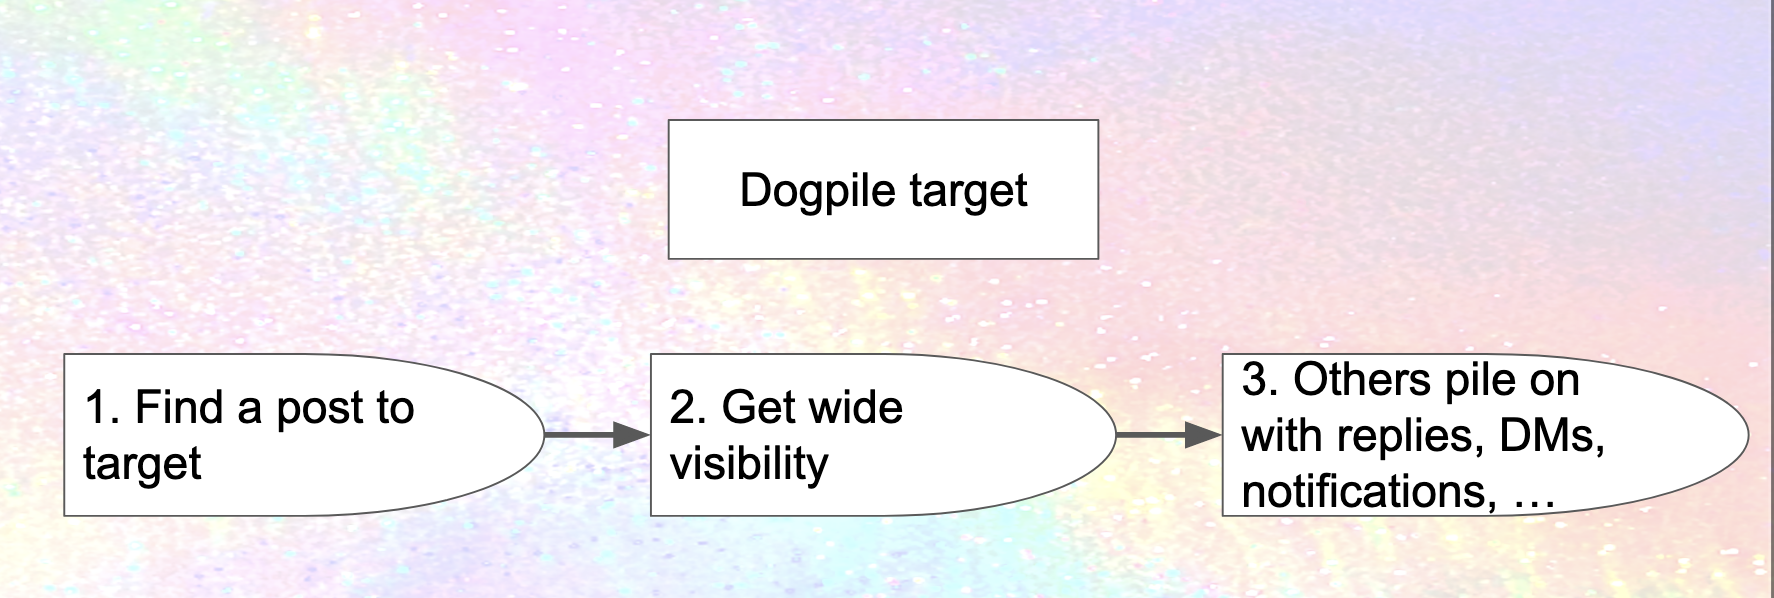 Four boxes with words in them.  On the top, "Dogpile target".  Below, "1. Find a post to target", "2. Get wide visibility" and "3. Others pile on with replies, DMs, notifications, ...""